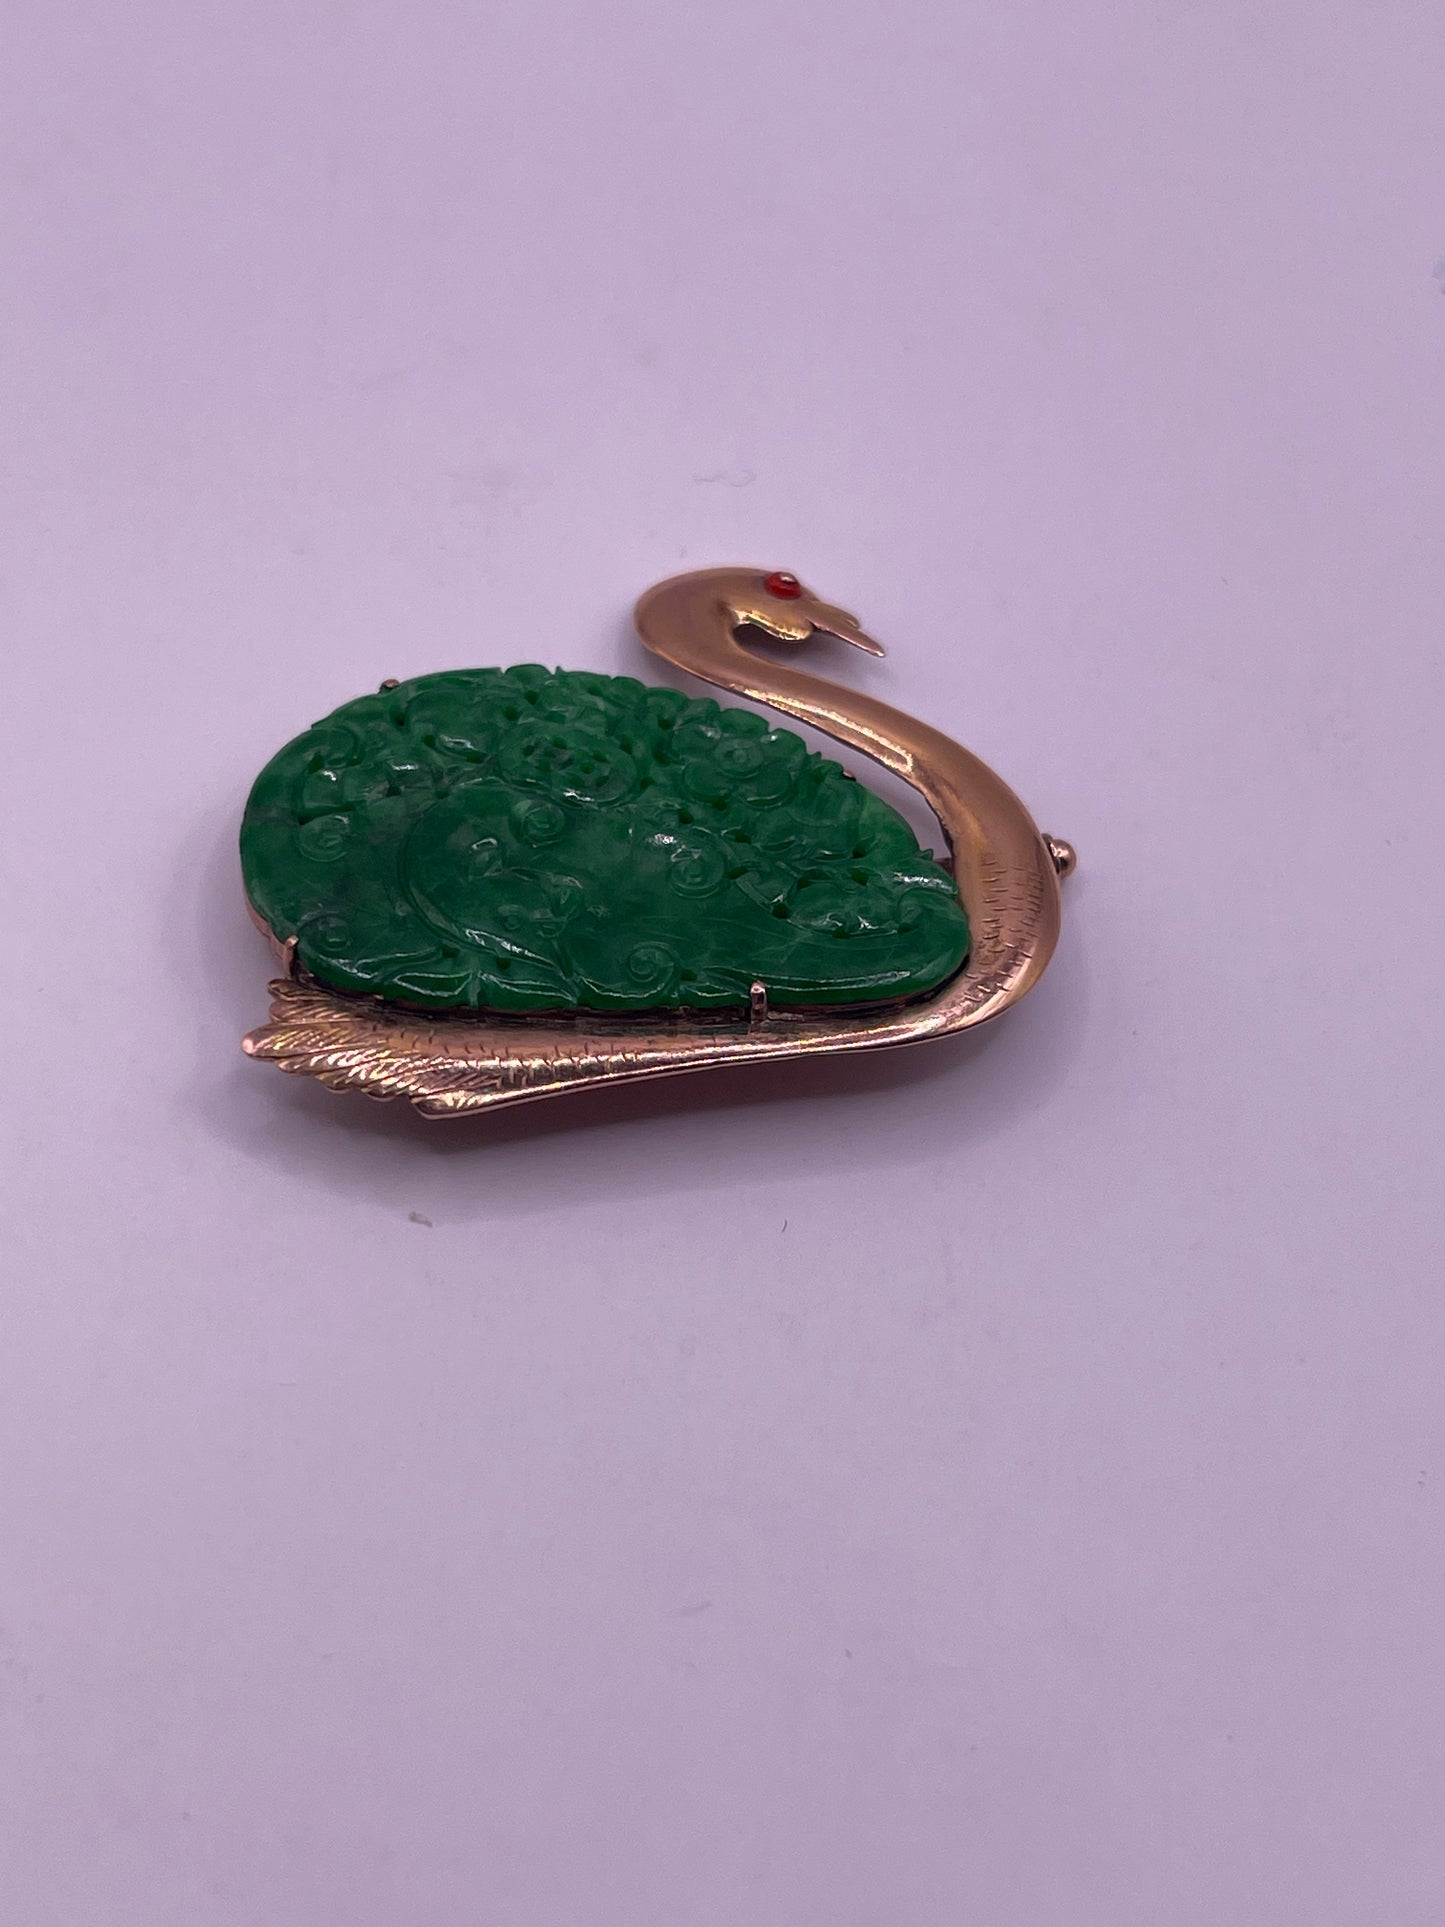 A jade plaque pin in a gold setting